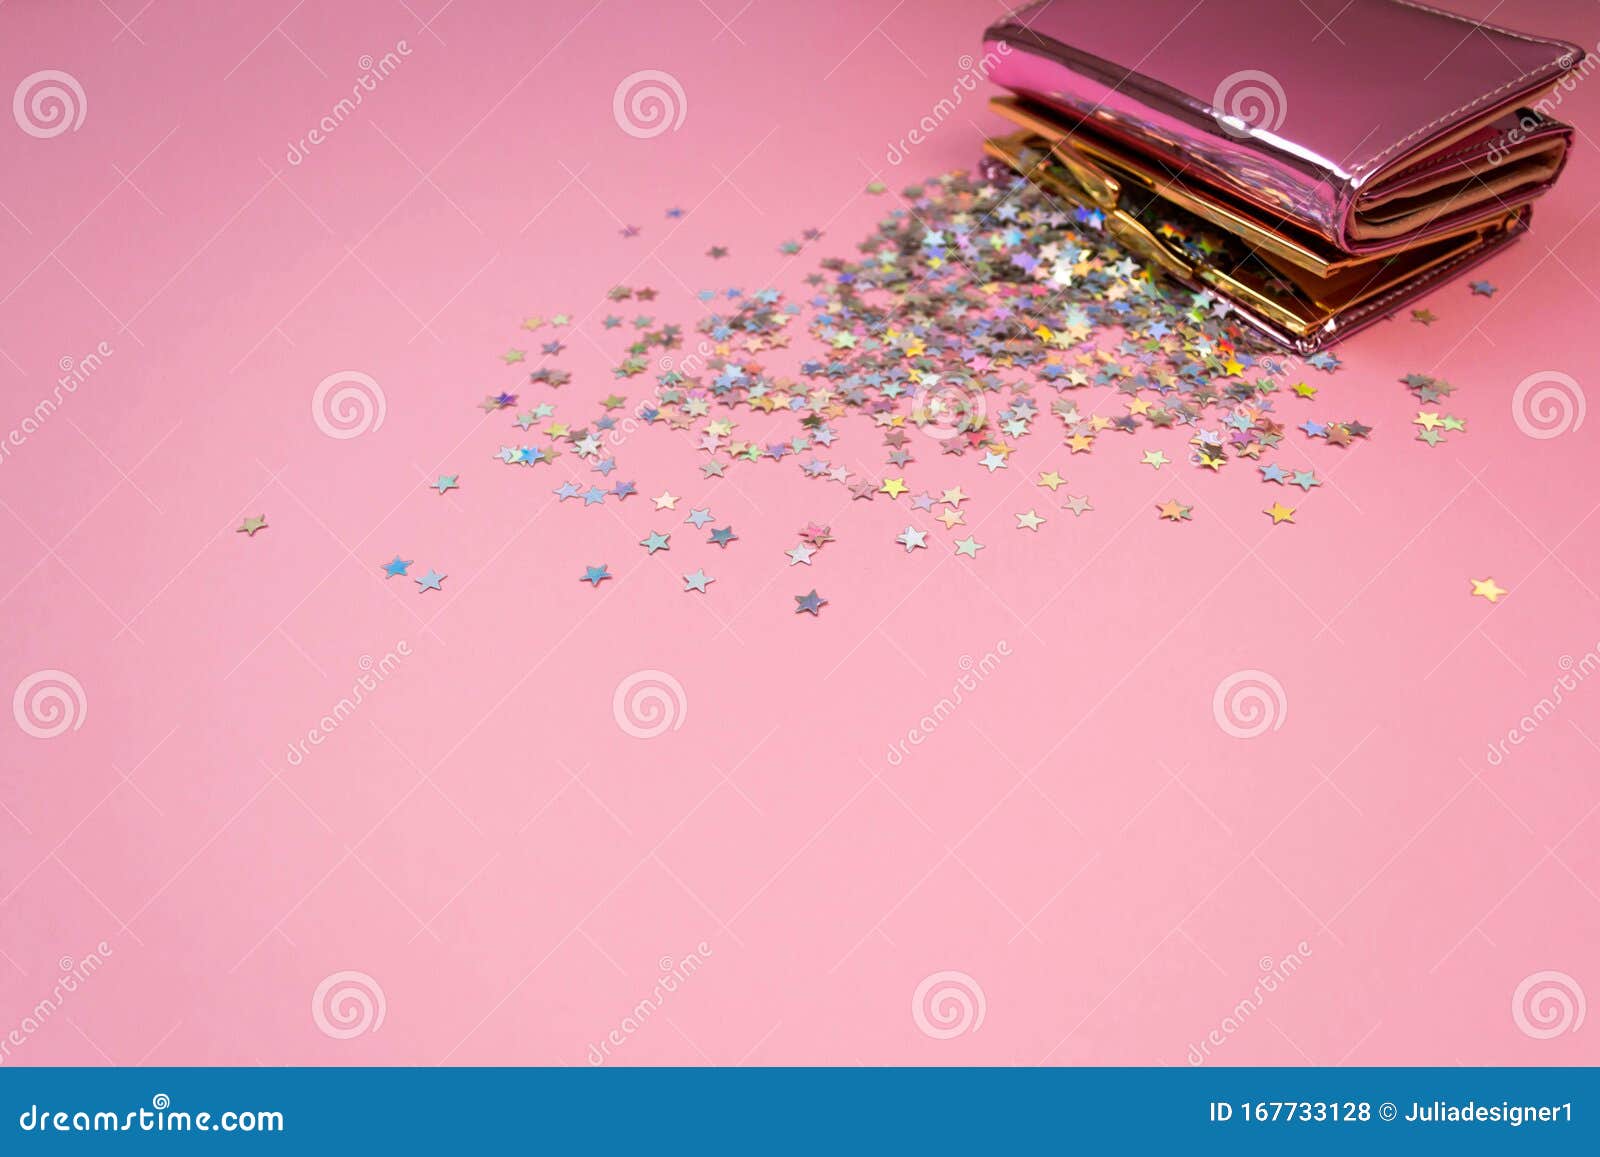 Confetti Stars And Rose Gold Purse On Soft Pink Background With Copy Space Stock Photo Image Of Flat Holiday